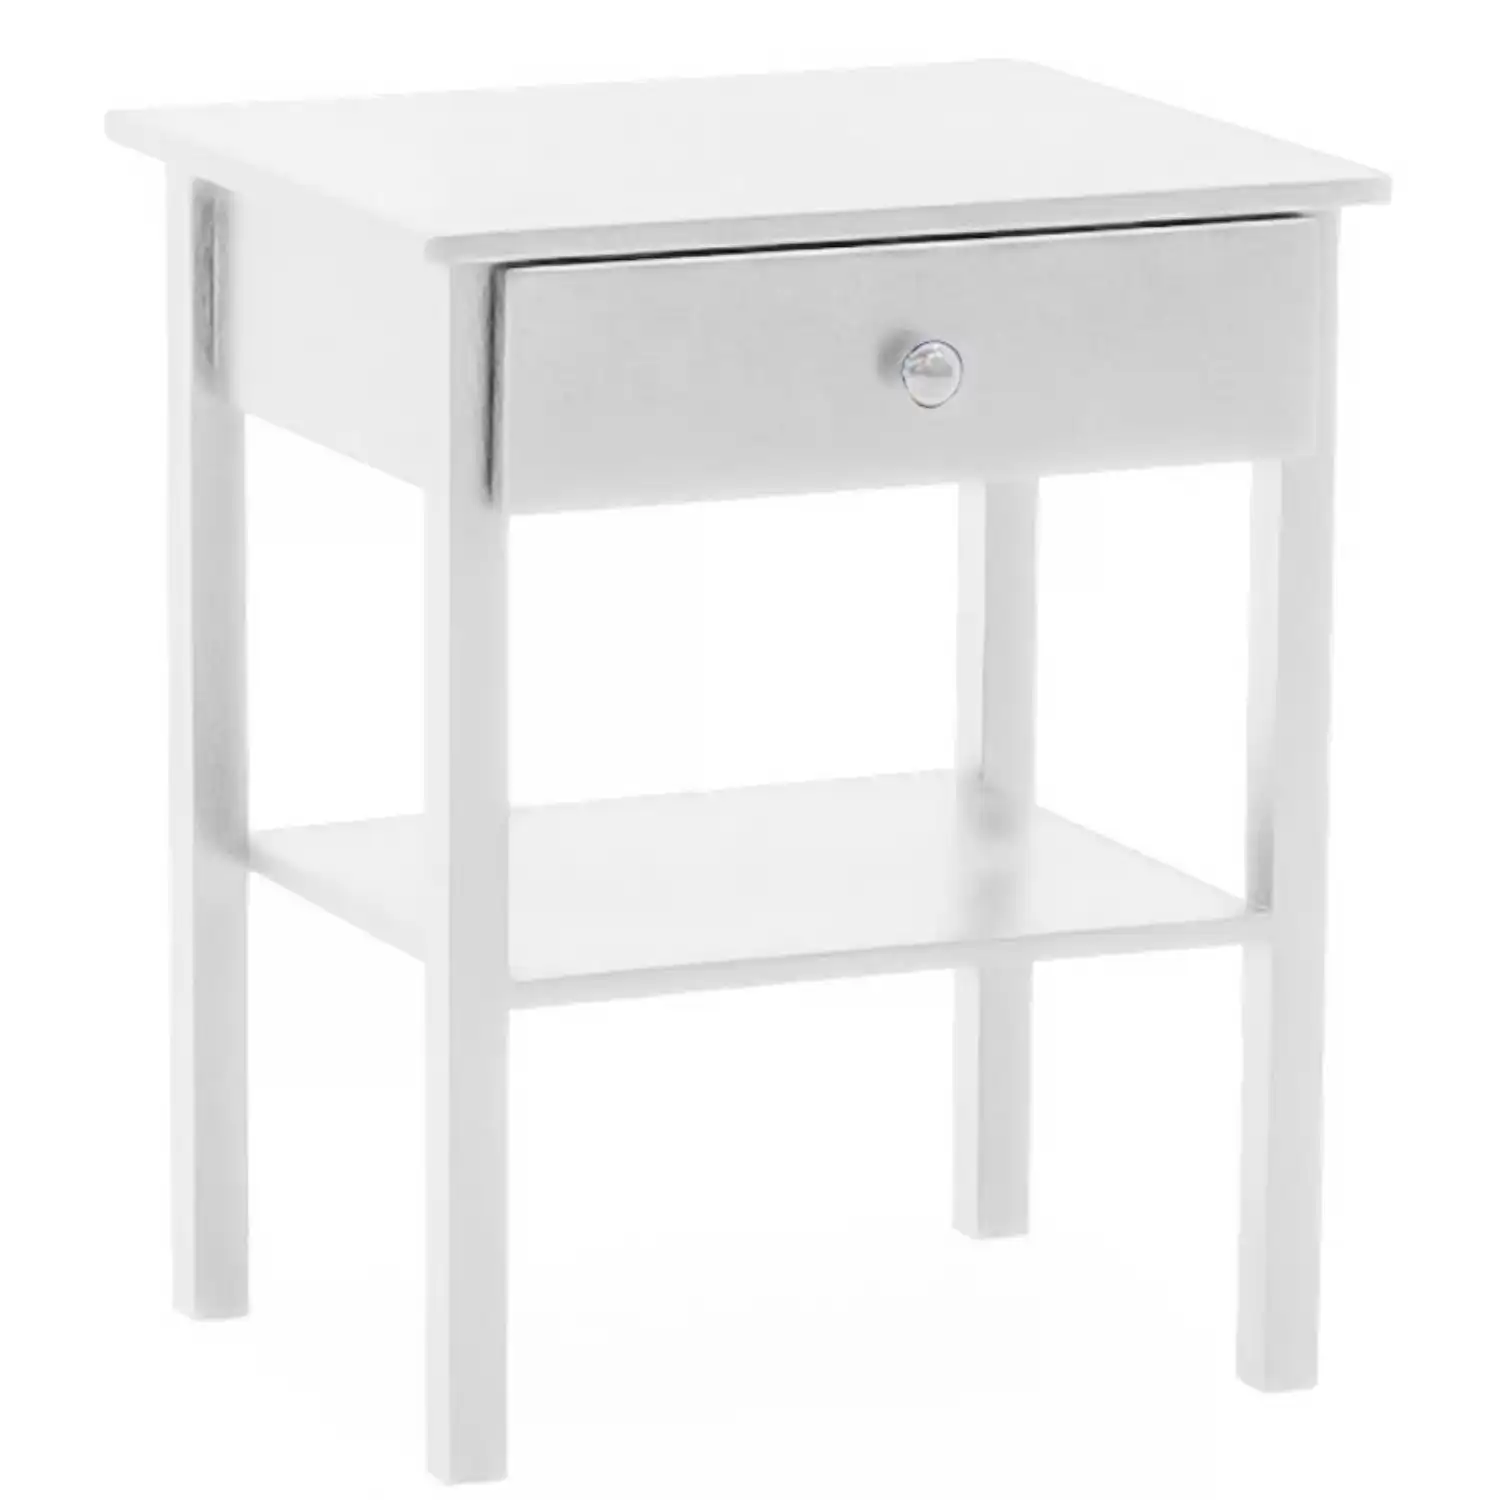 White Painted 1 Drawer 1 Shelf Bedside Table Cabinet